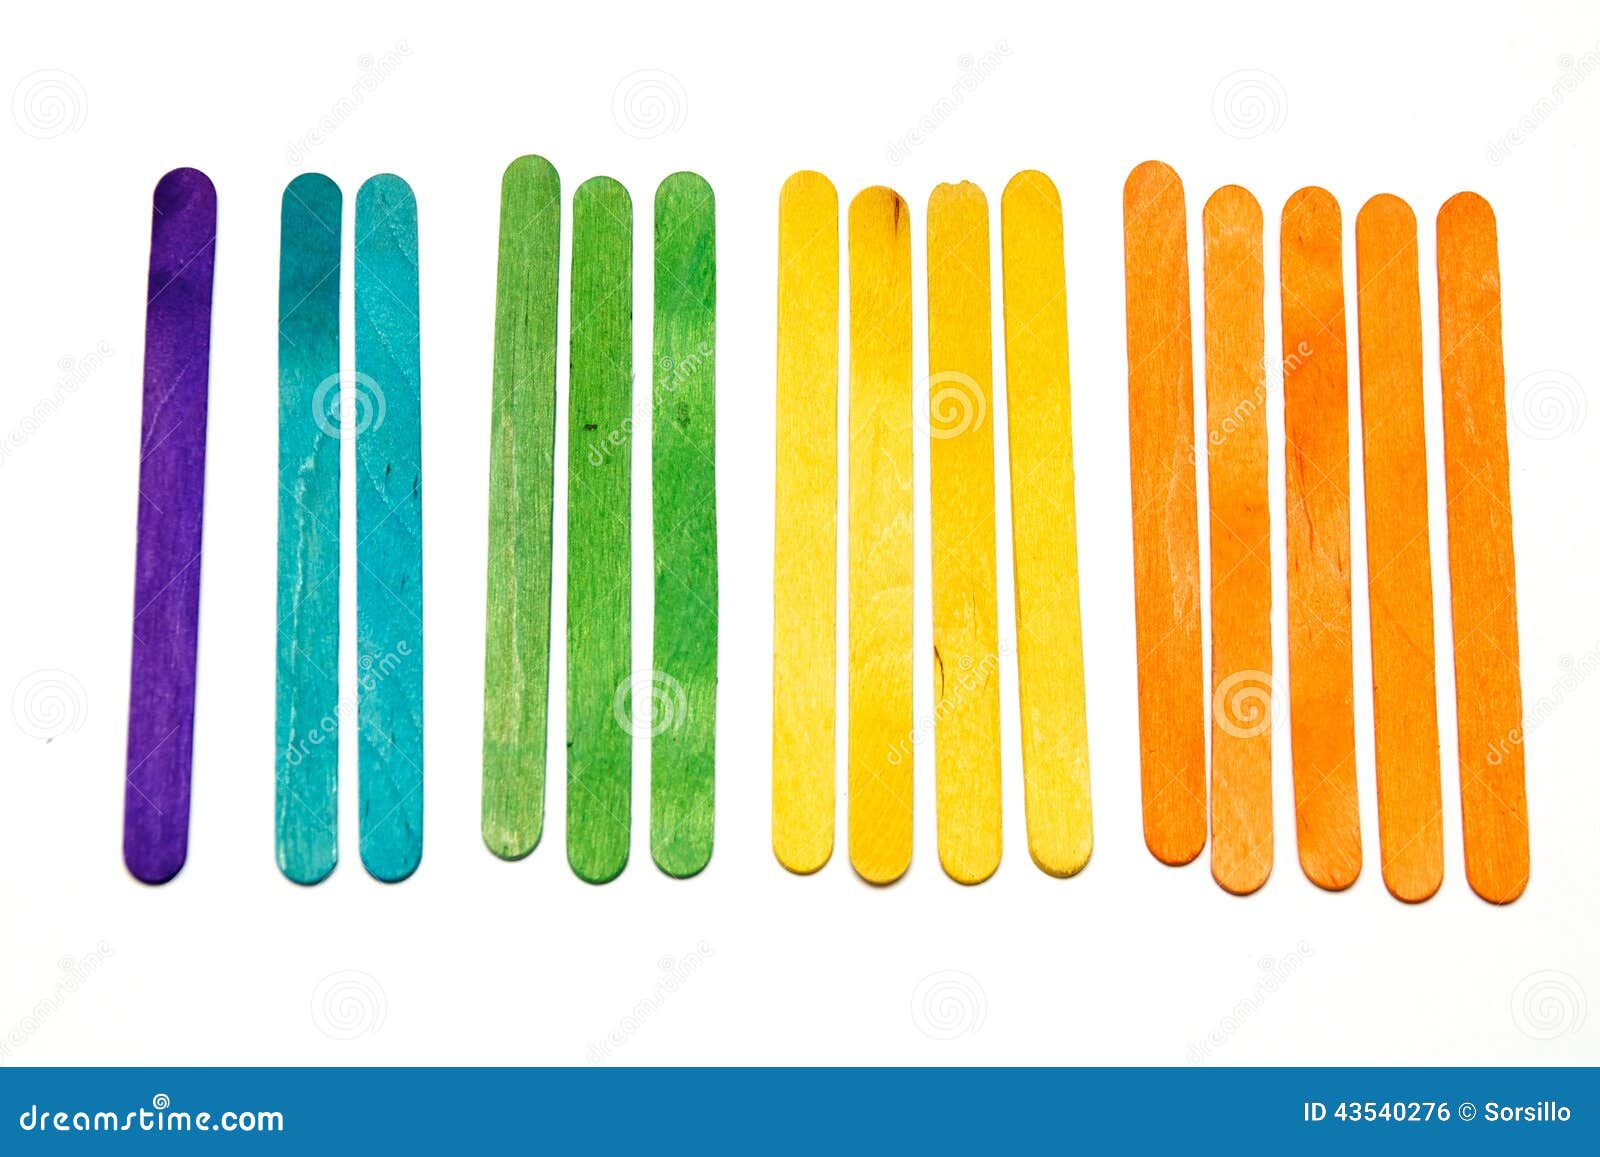 Premium Photo  Close-up of colorful popsicle sticks against white